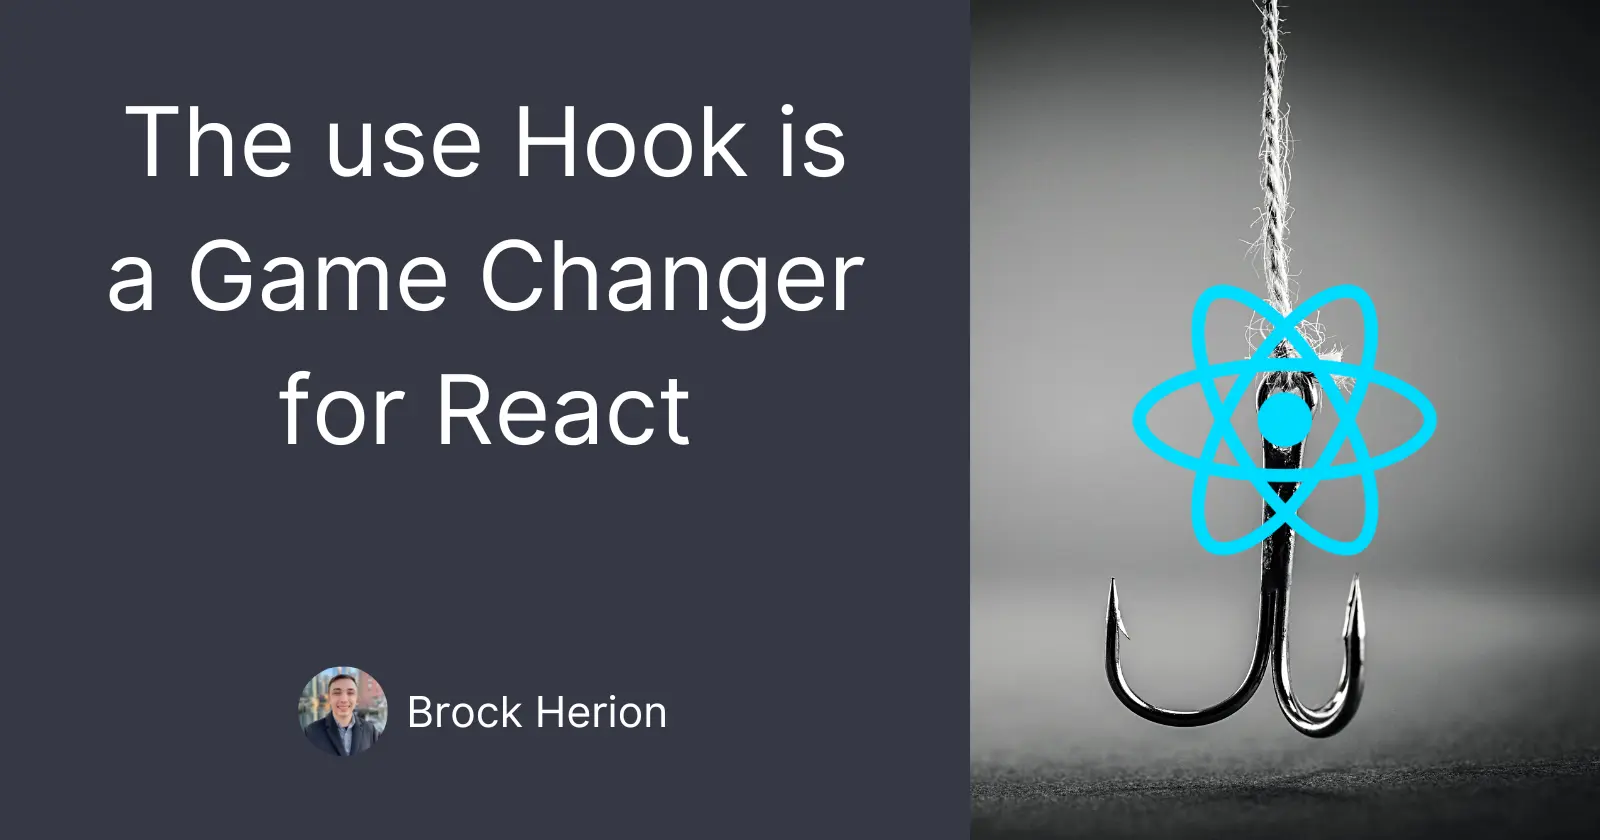 The use hook is a game changer for React